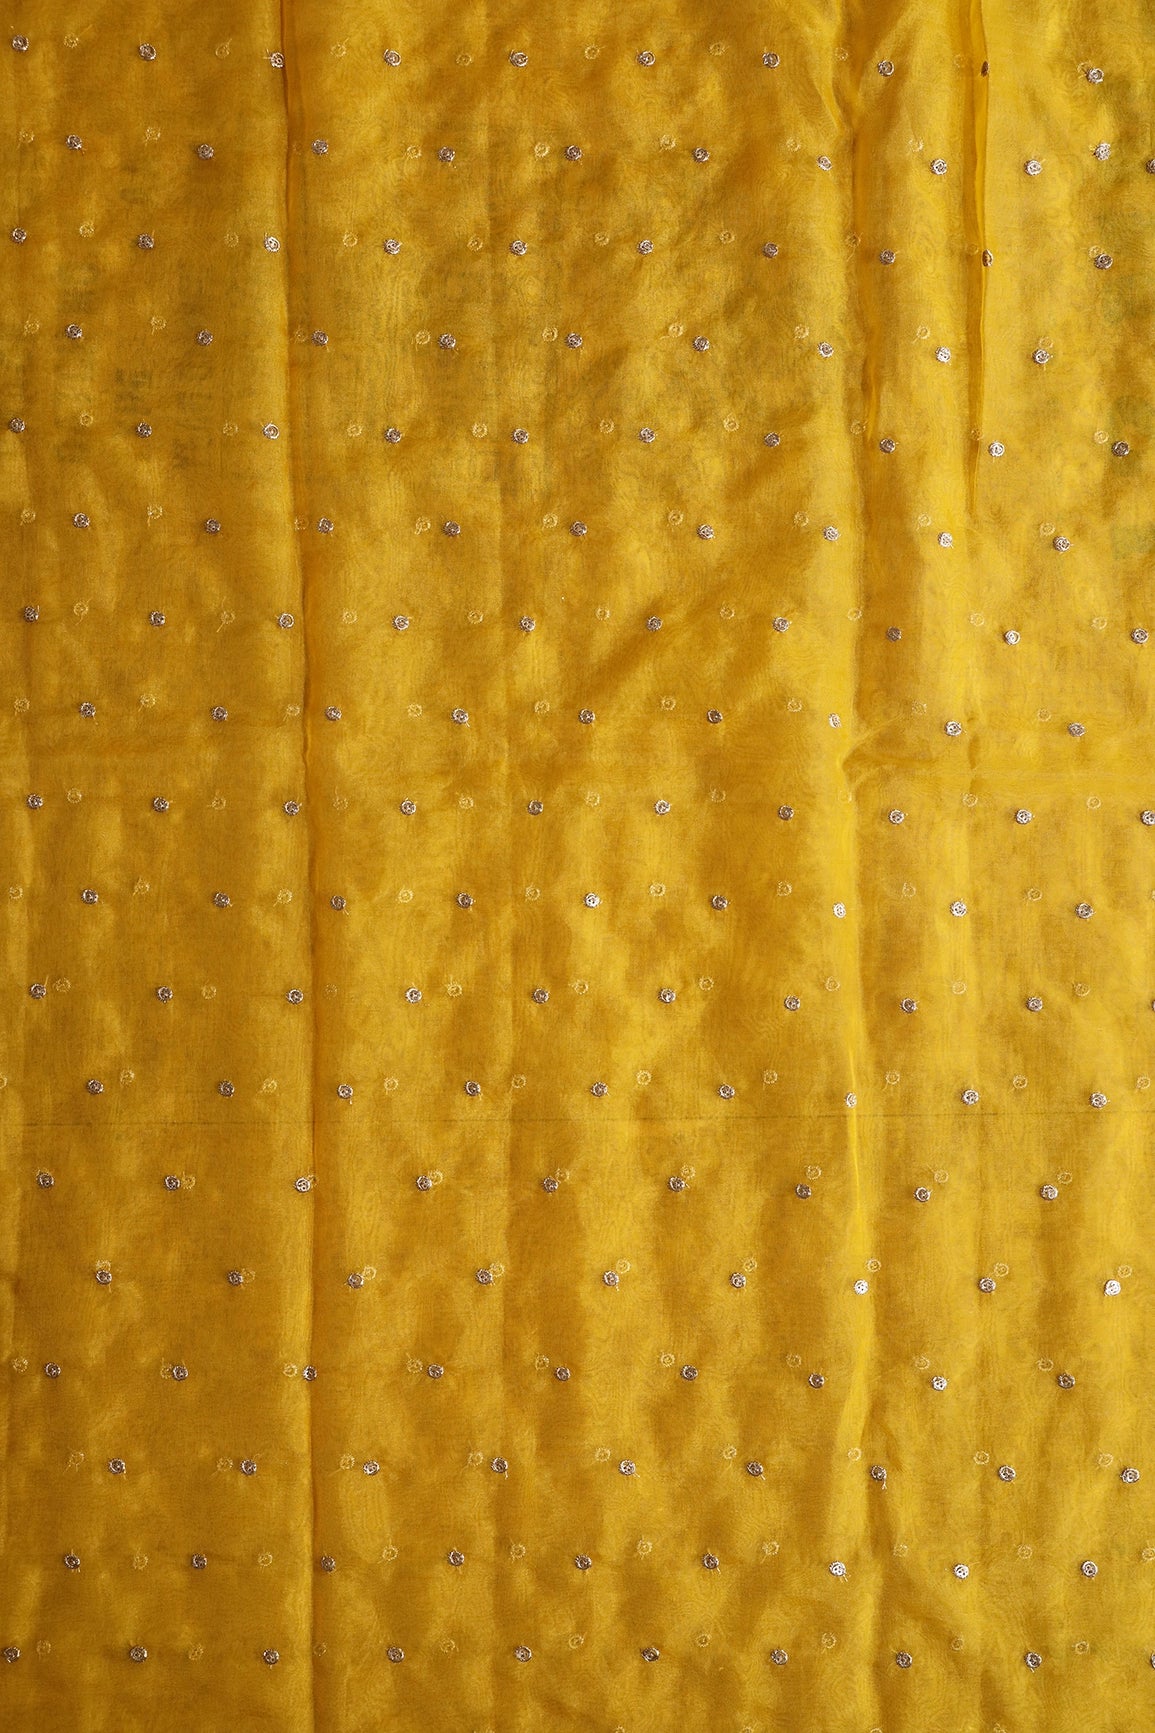 2.50 Meter Cut Piece Of Gold Zari With Gold Sequins Small Motif Embroidery On Yellow Organza Fabric